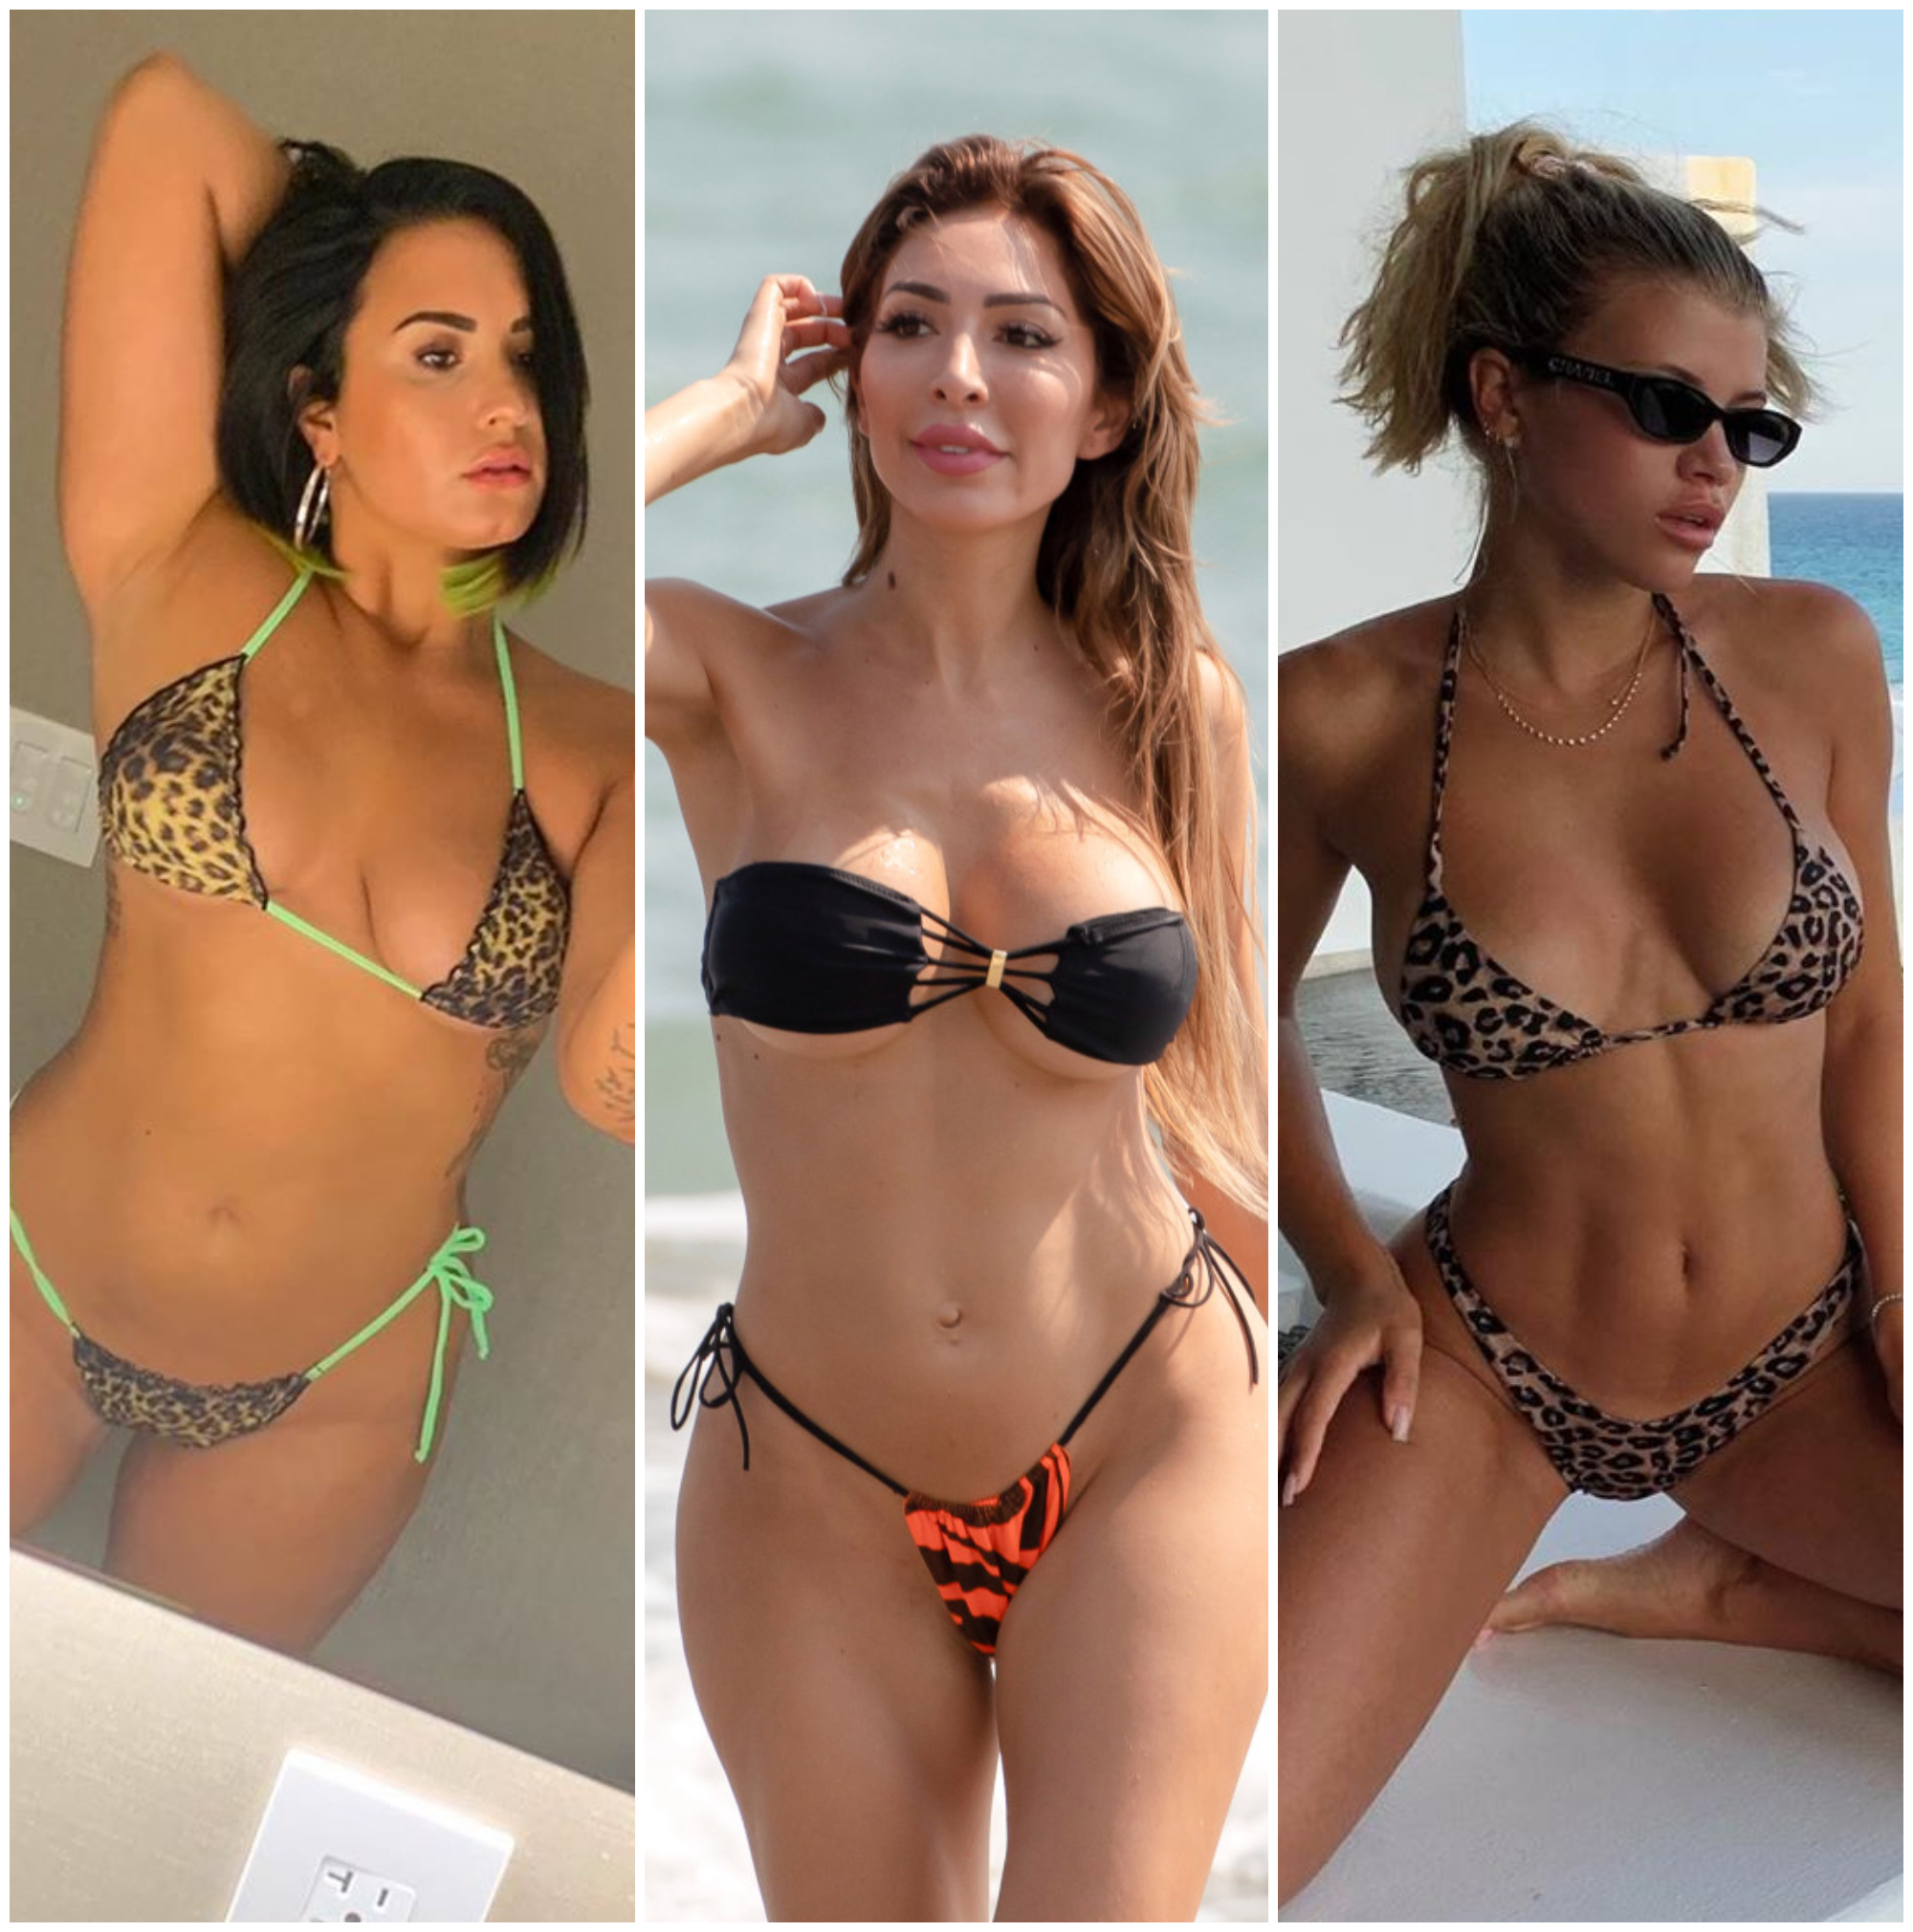 Probleem Wennen aan vacht Sexy Bikini Photos of Celebrities From Summer: Demi Lovato and More